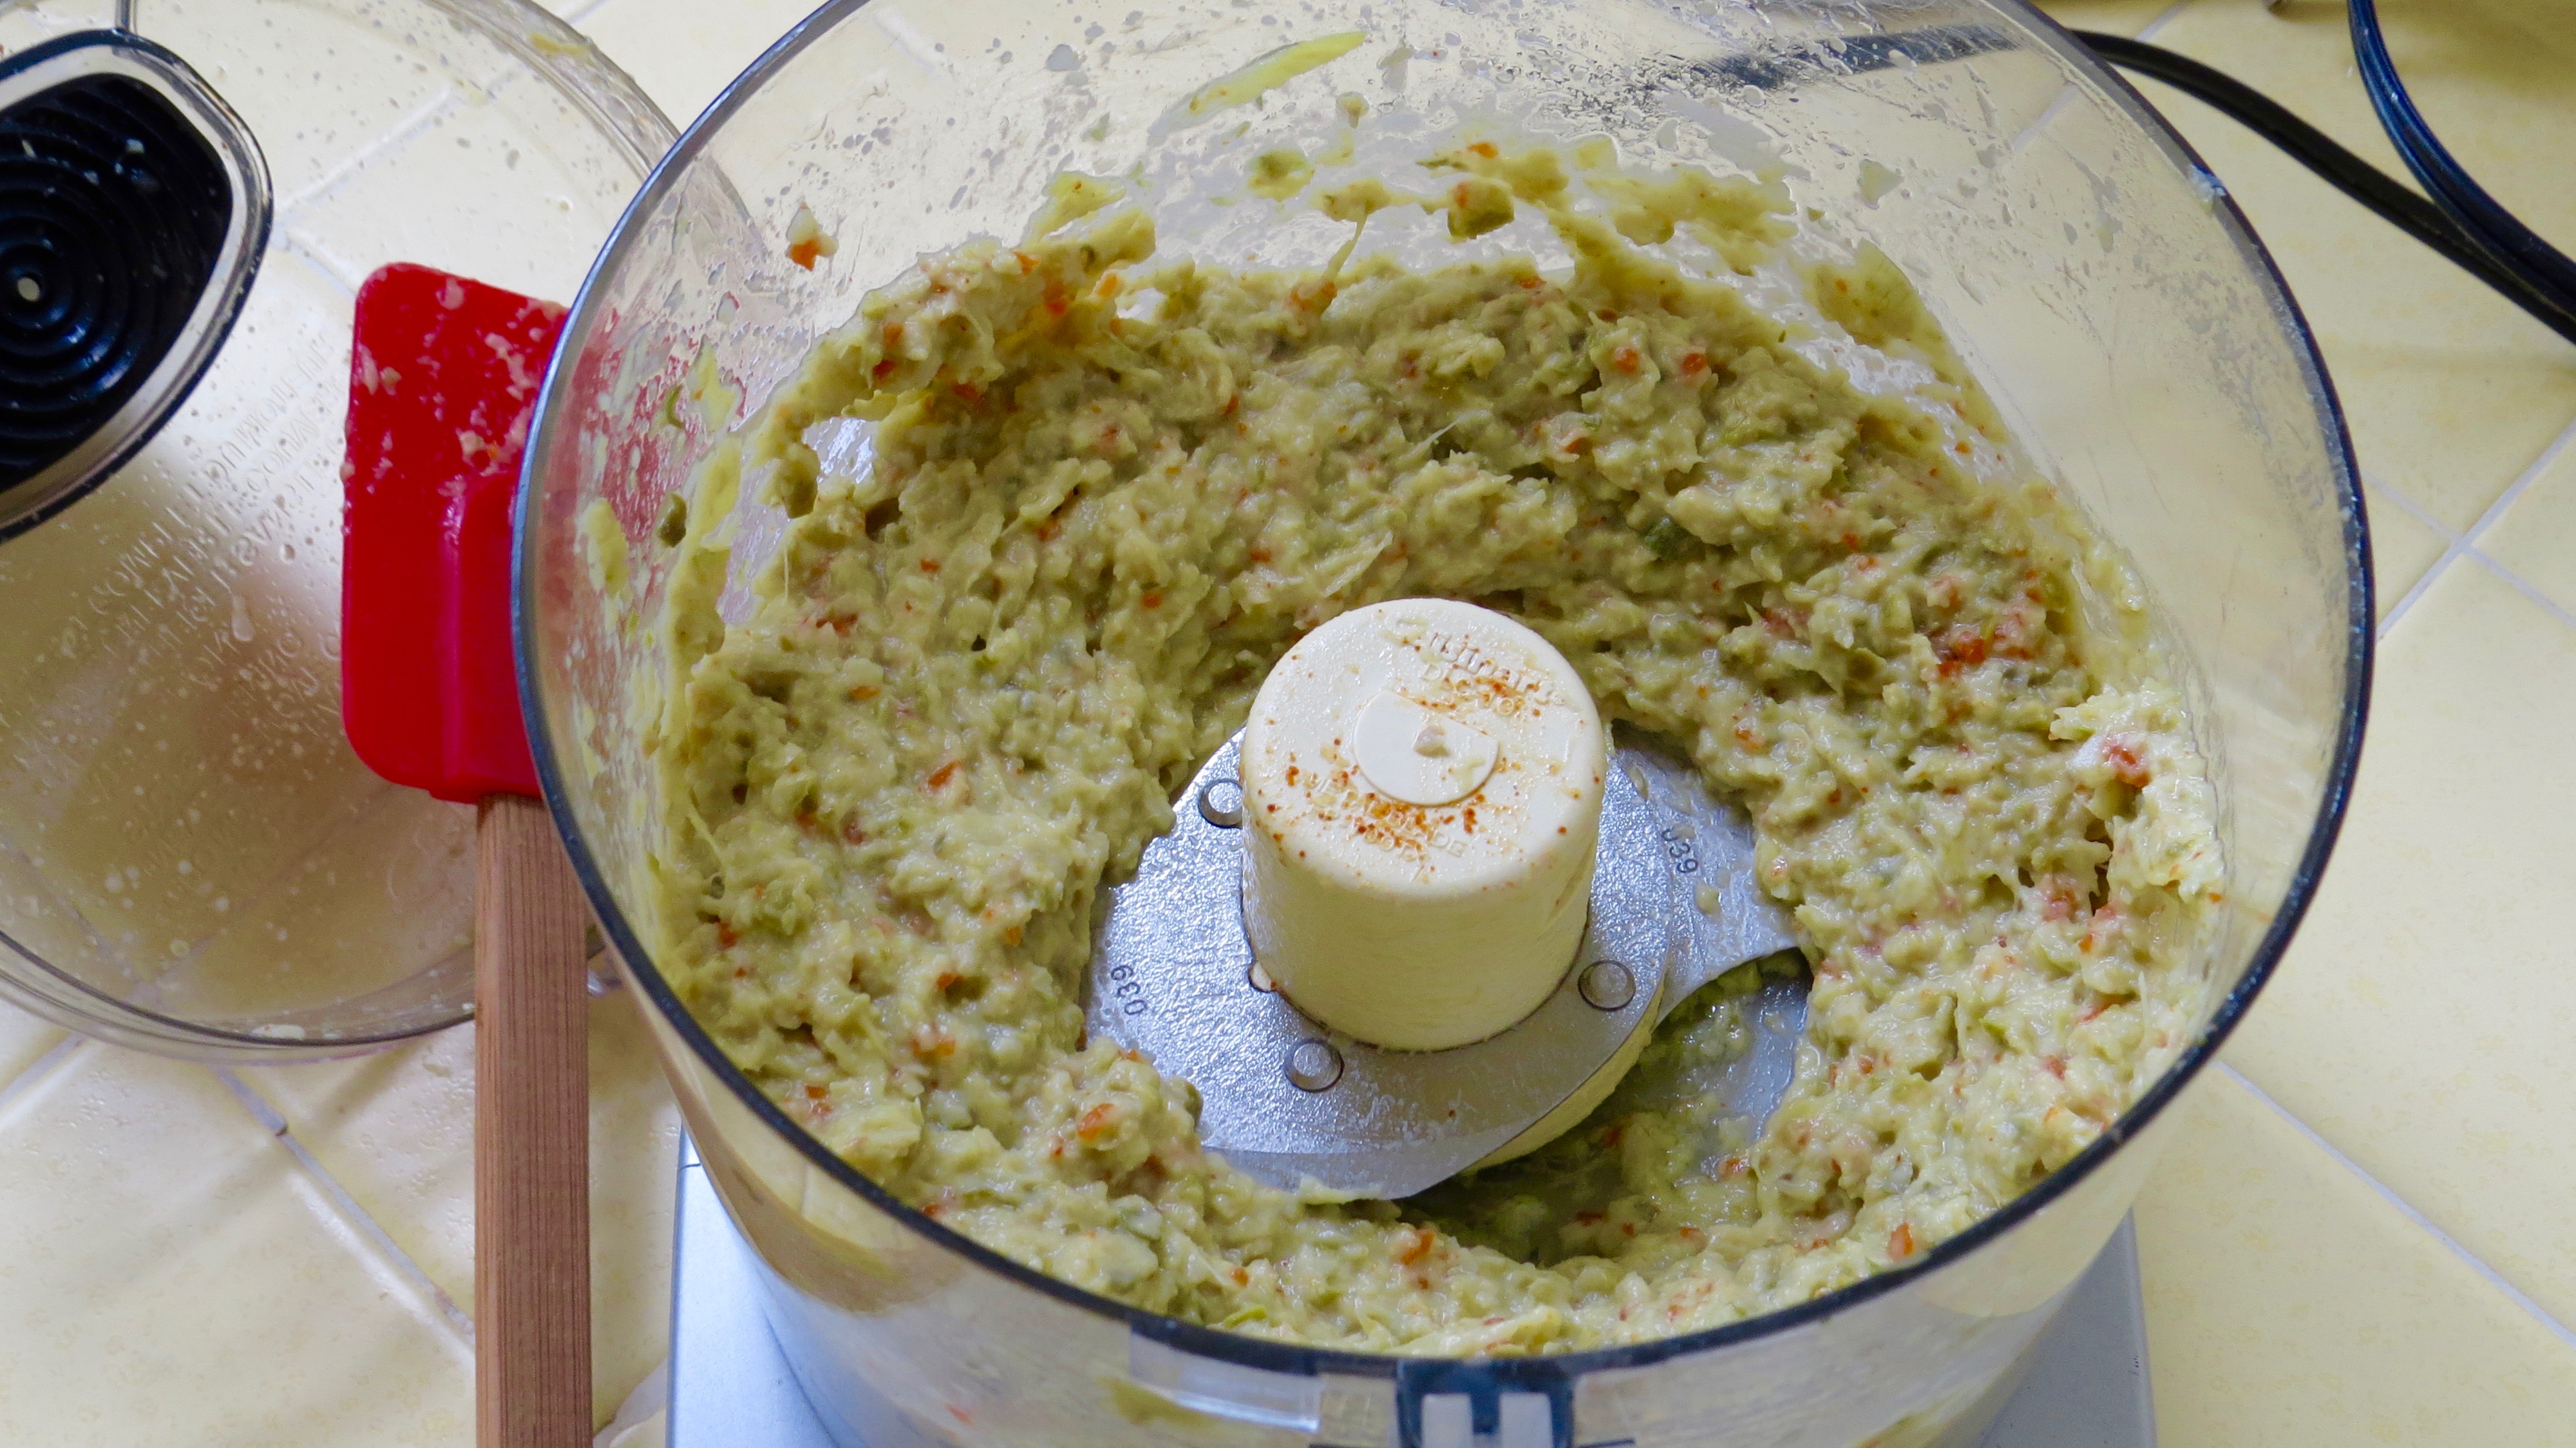 Load. Lock. Puree. This tapenade can be thrown together in 10 minutes.